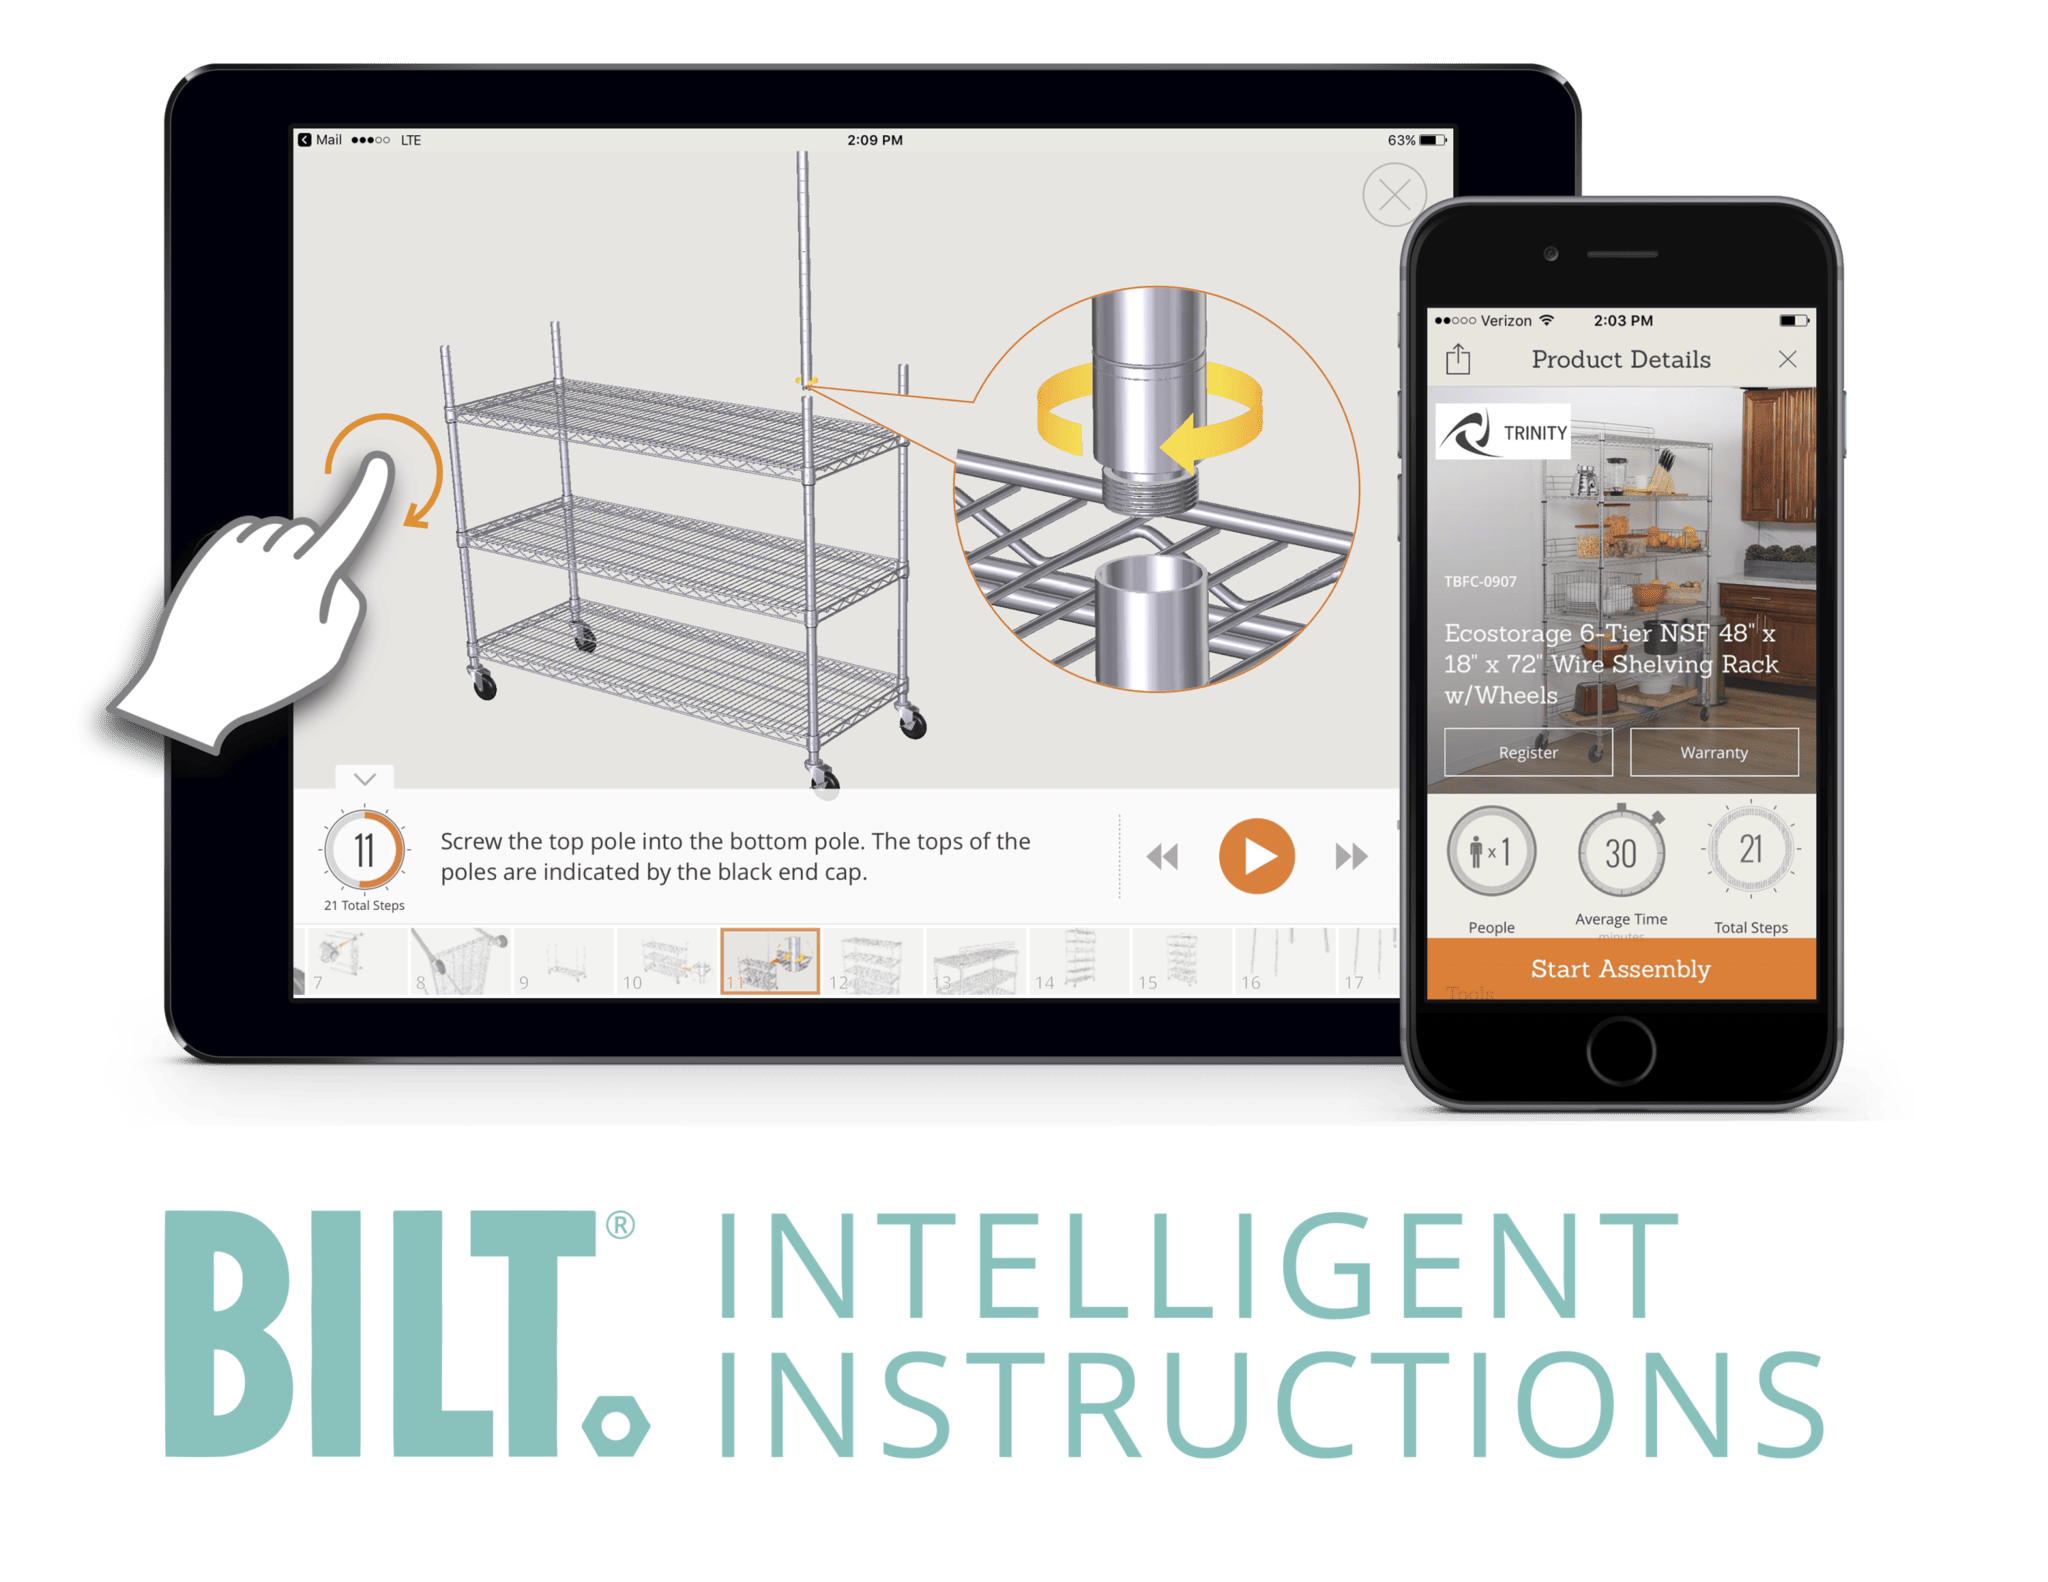 bilt intelligent instructions for tablet and mobile devices